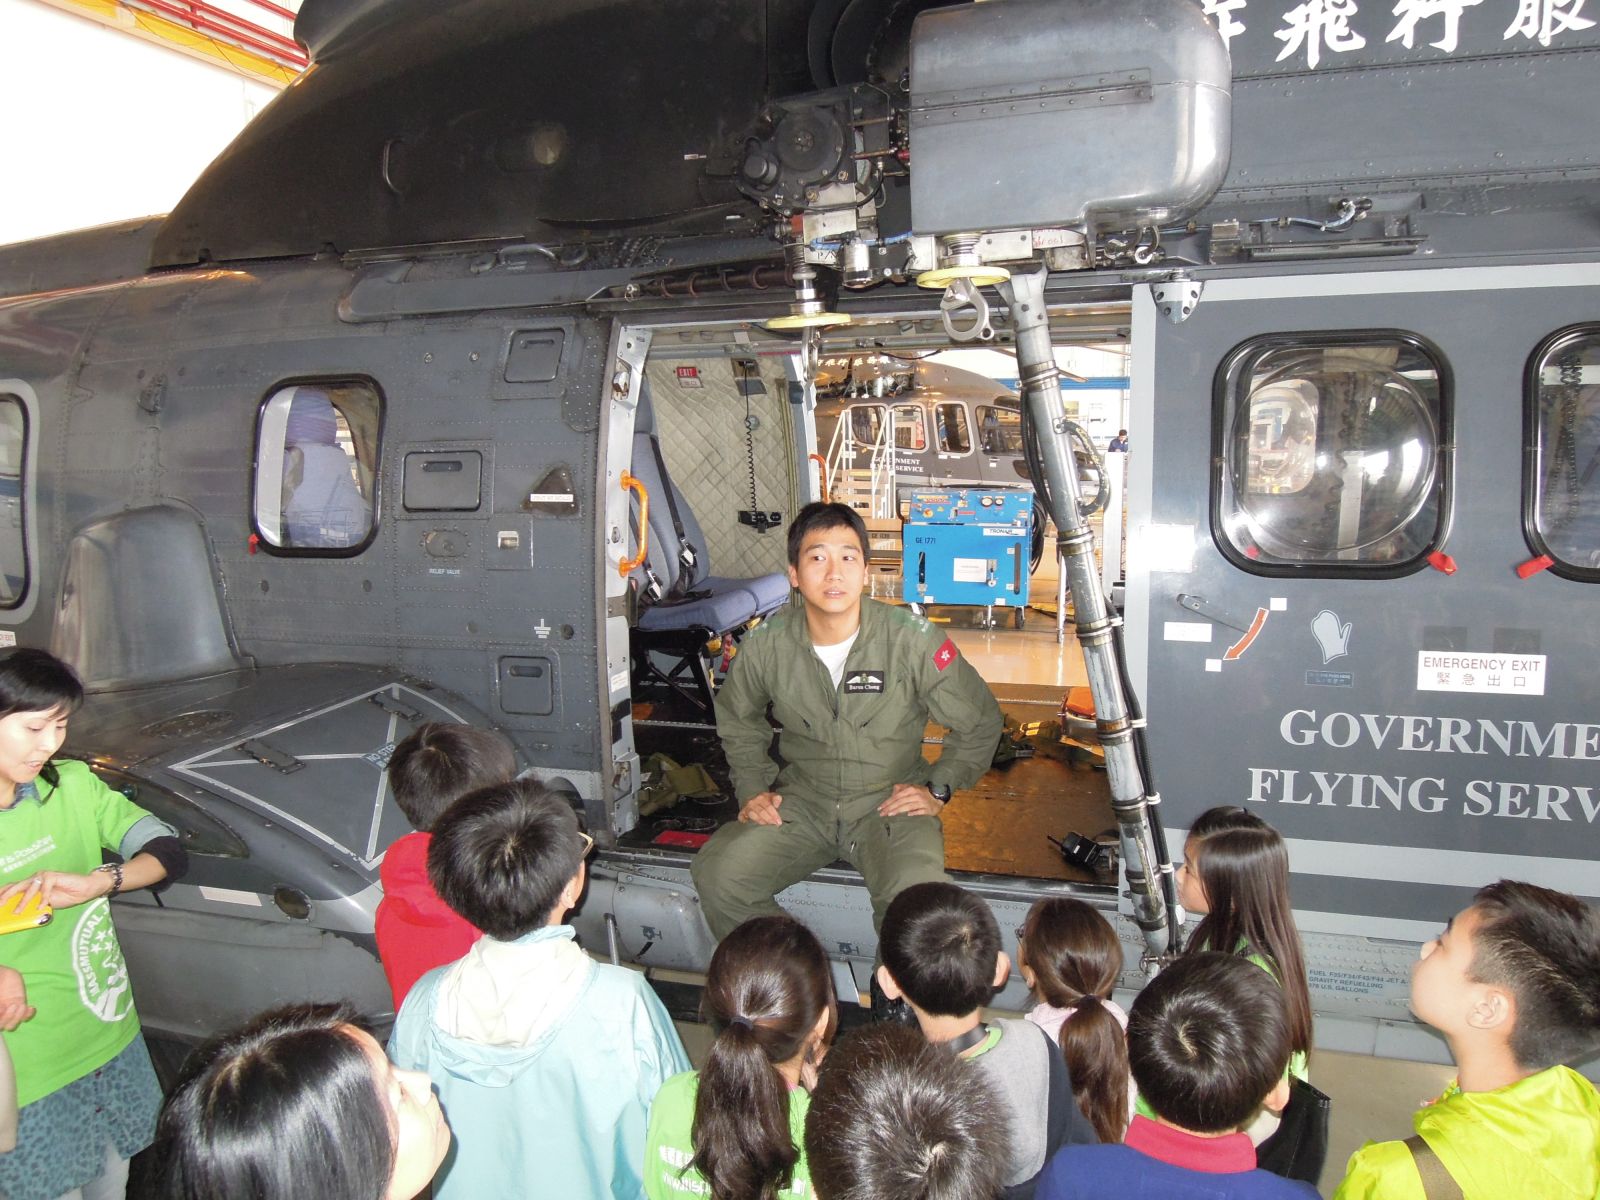 Visit to Government Flying Service